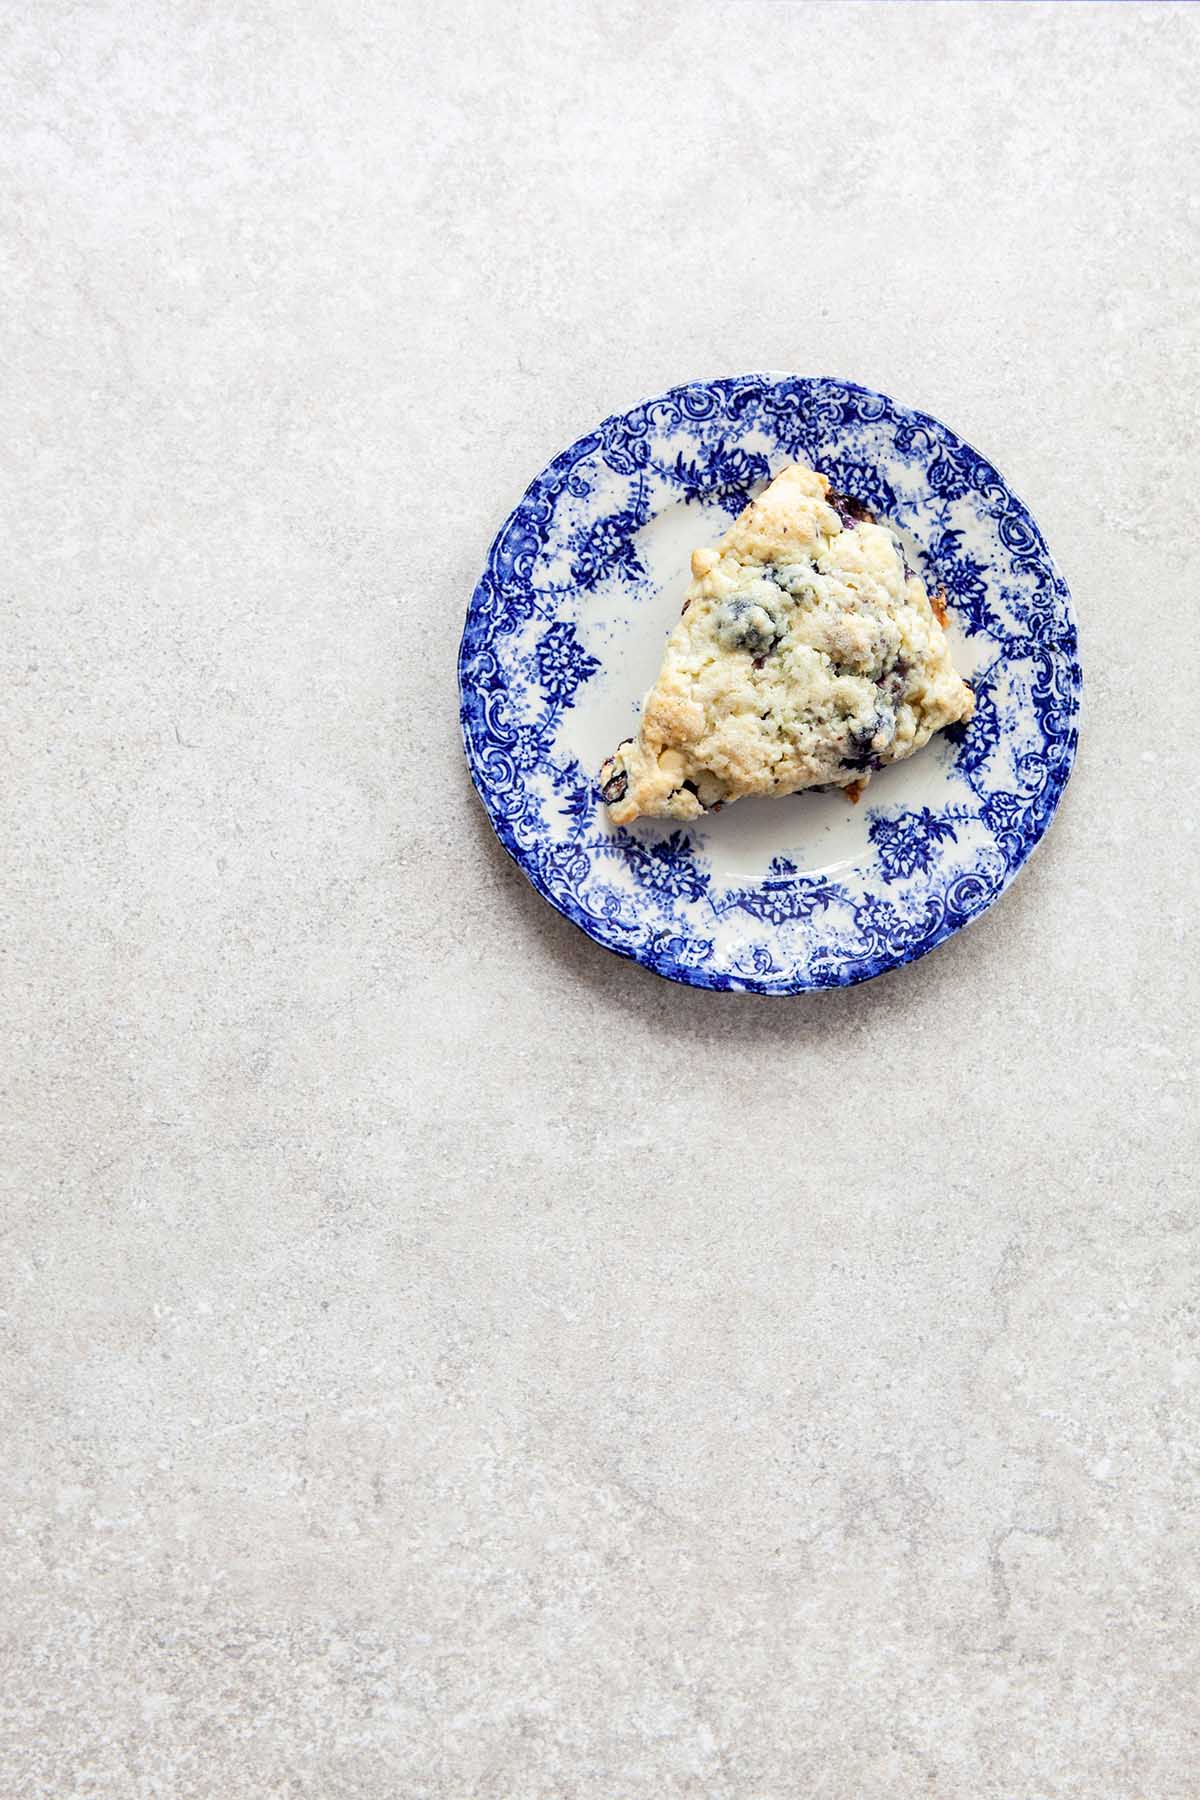 One scone on a blue and white plate on a stone surface.